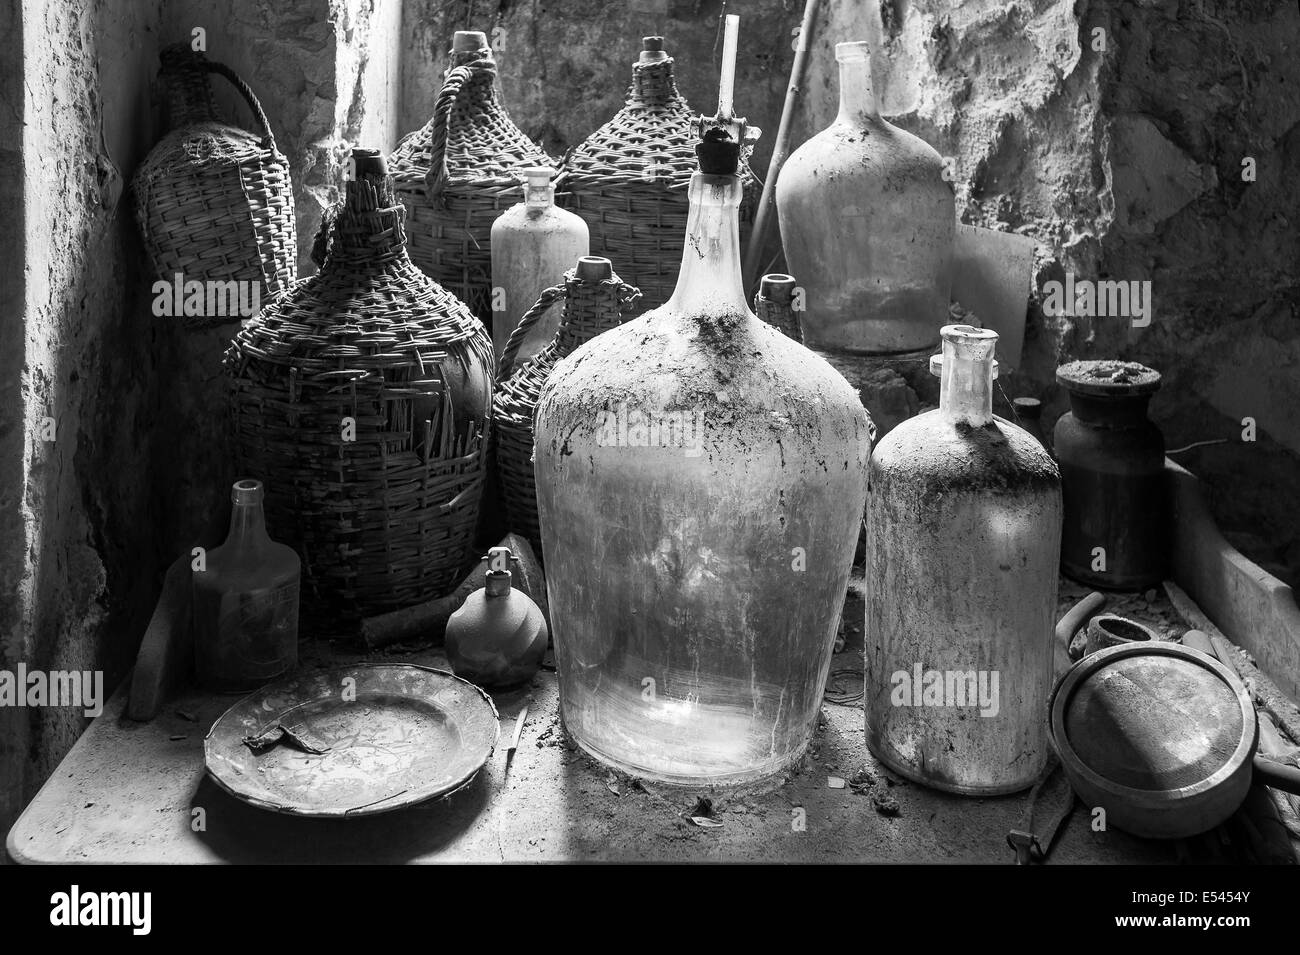 old demijohns Stock Photo